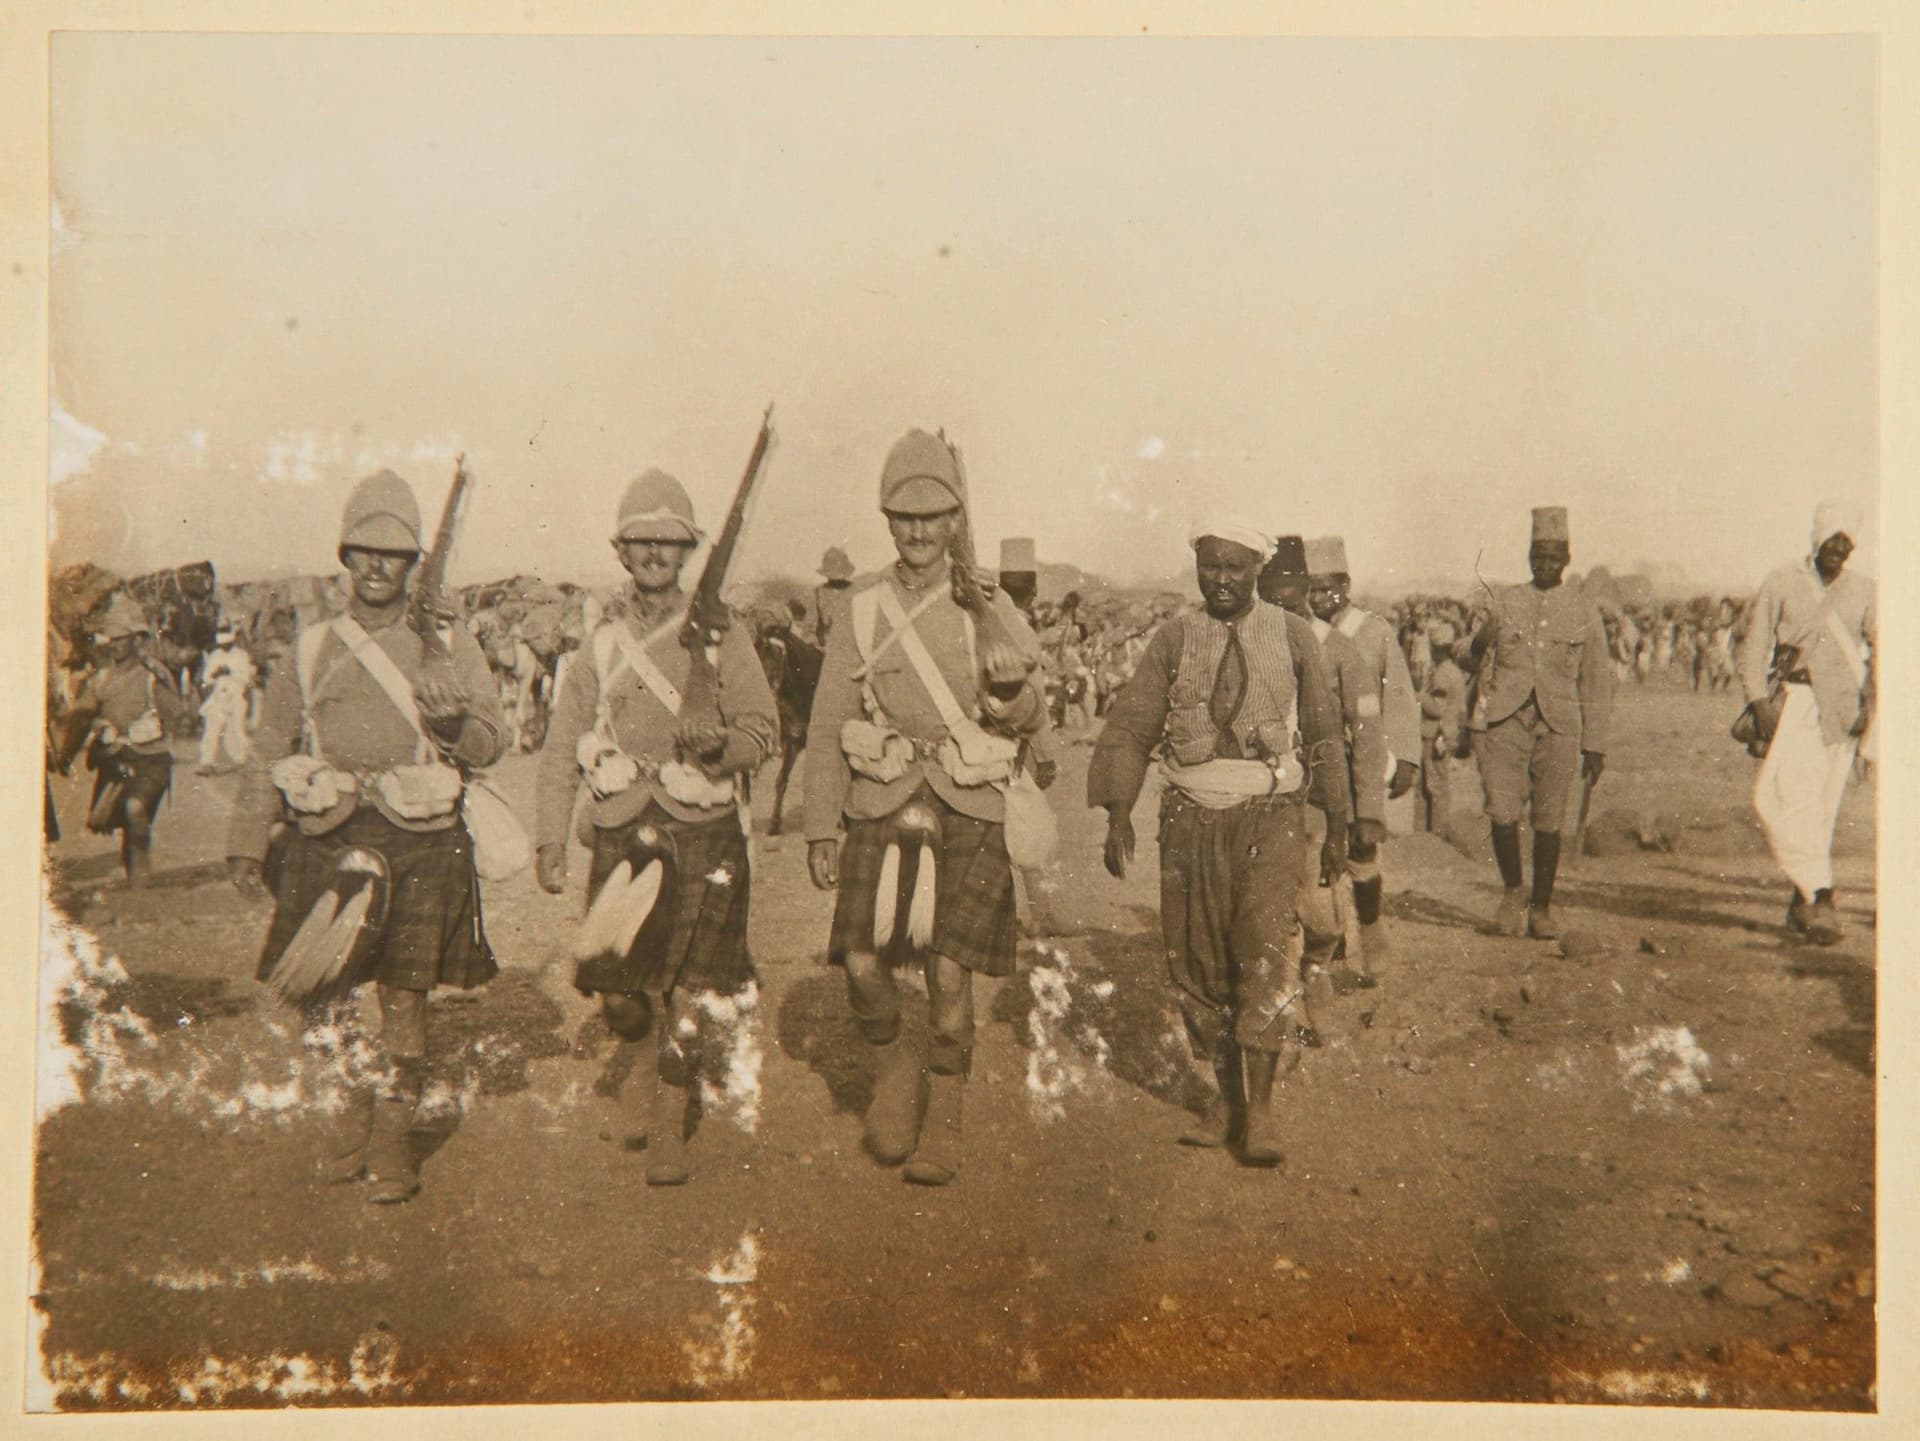 79th Cameron Highlanders, Sudan, 1898 just before Rose's arrival in Egypt